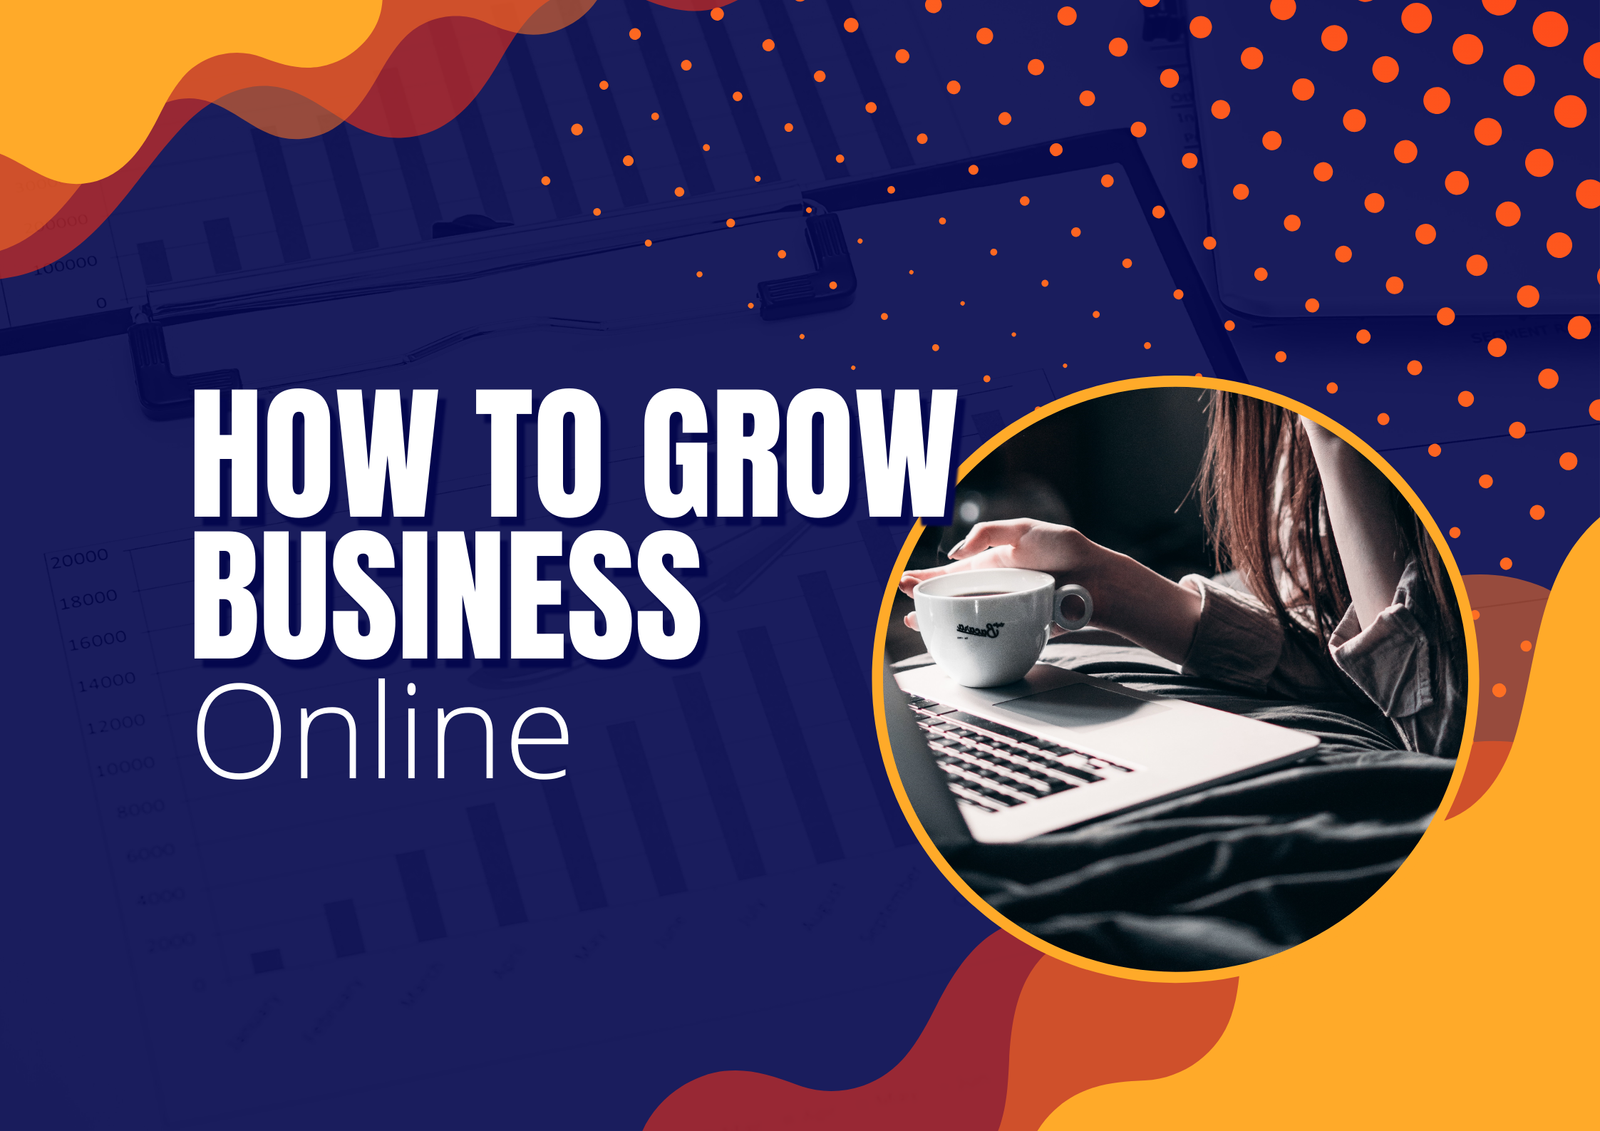 How to Grow Business Online? #Online Business Idea